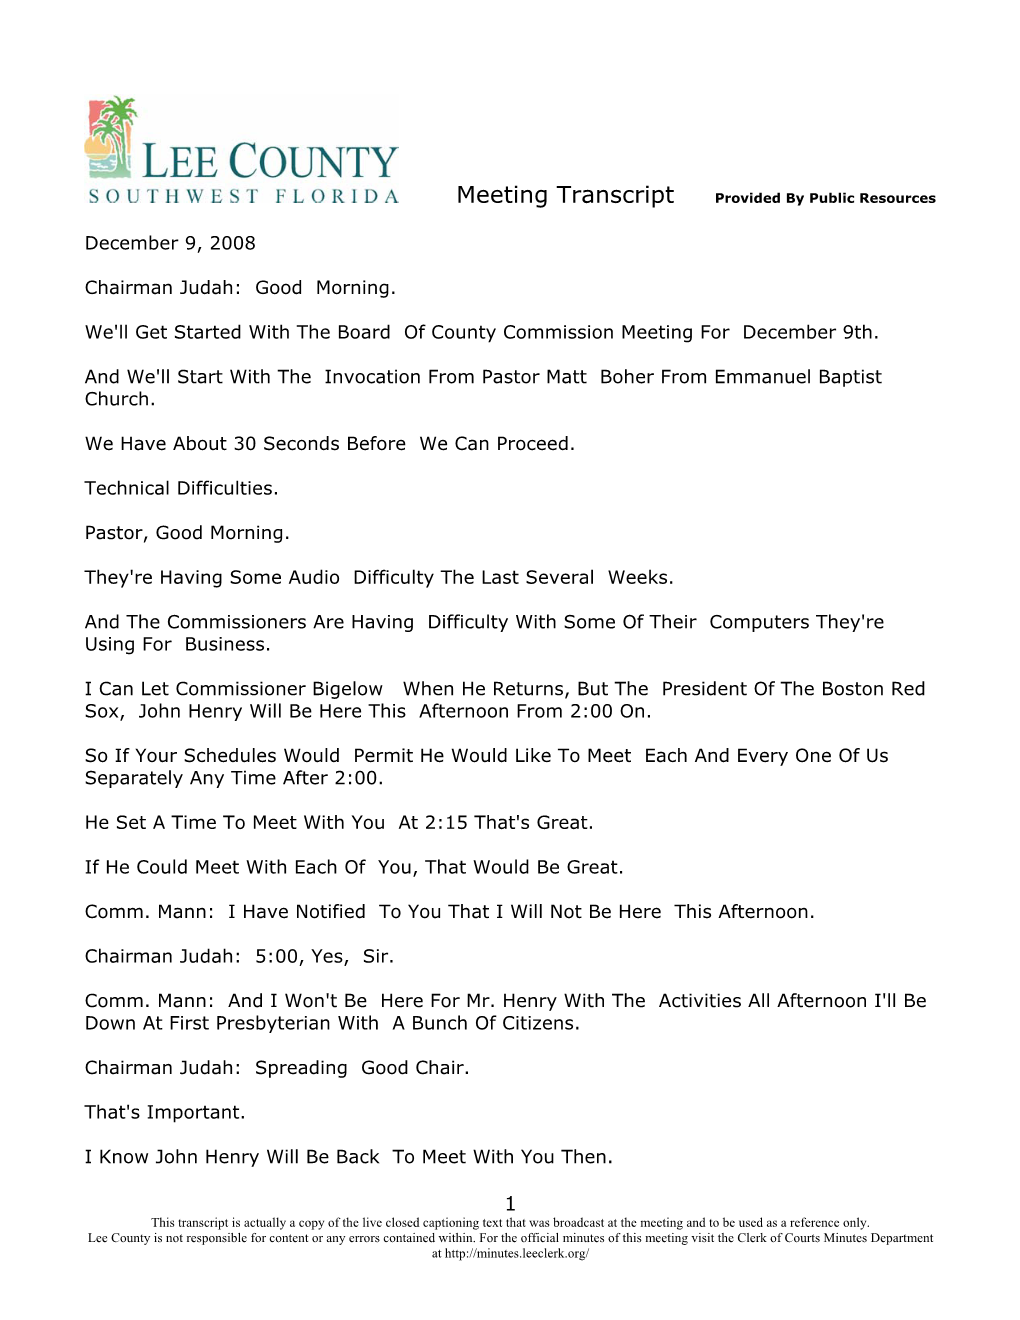 (Lee County November 15, 2005) Commissioners Meeting